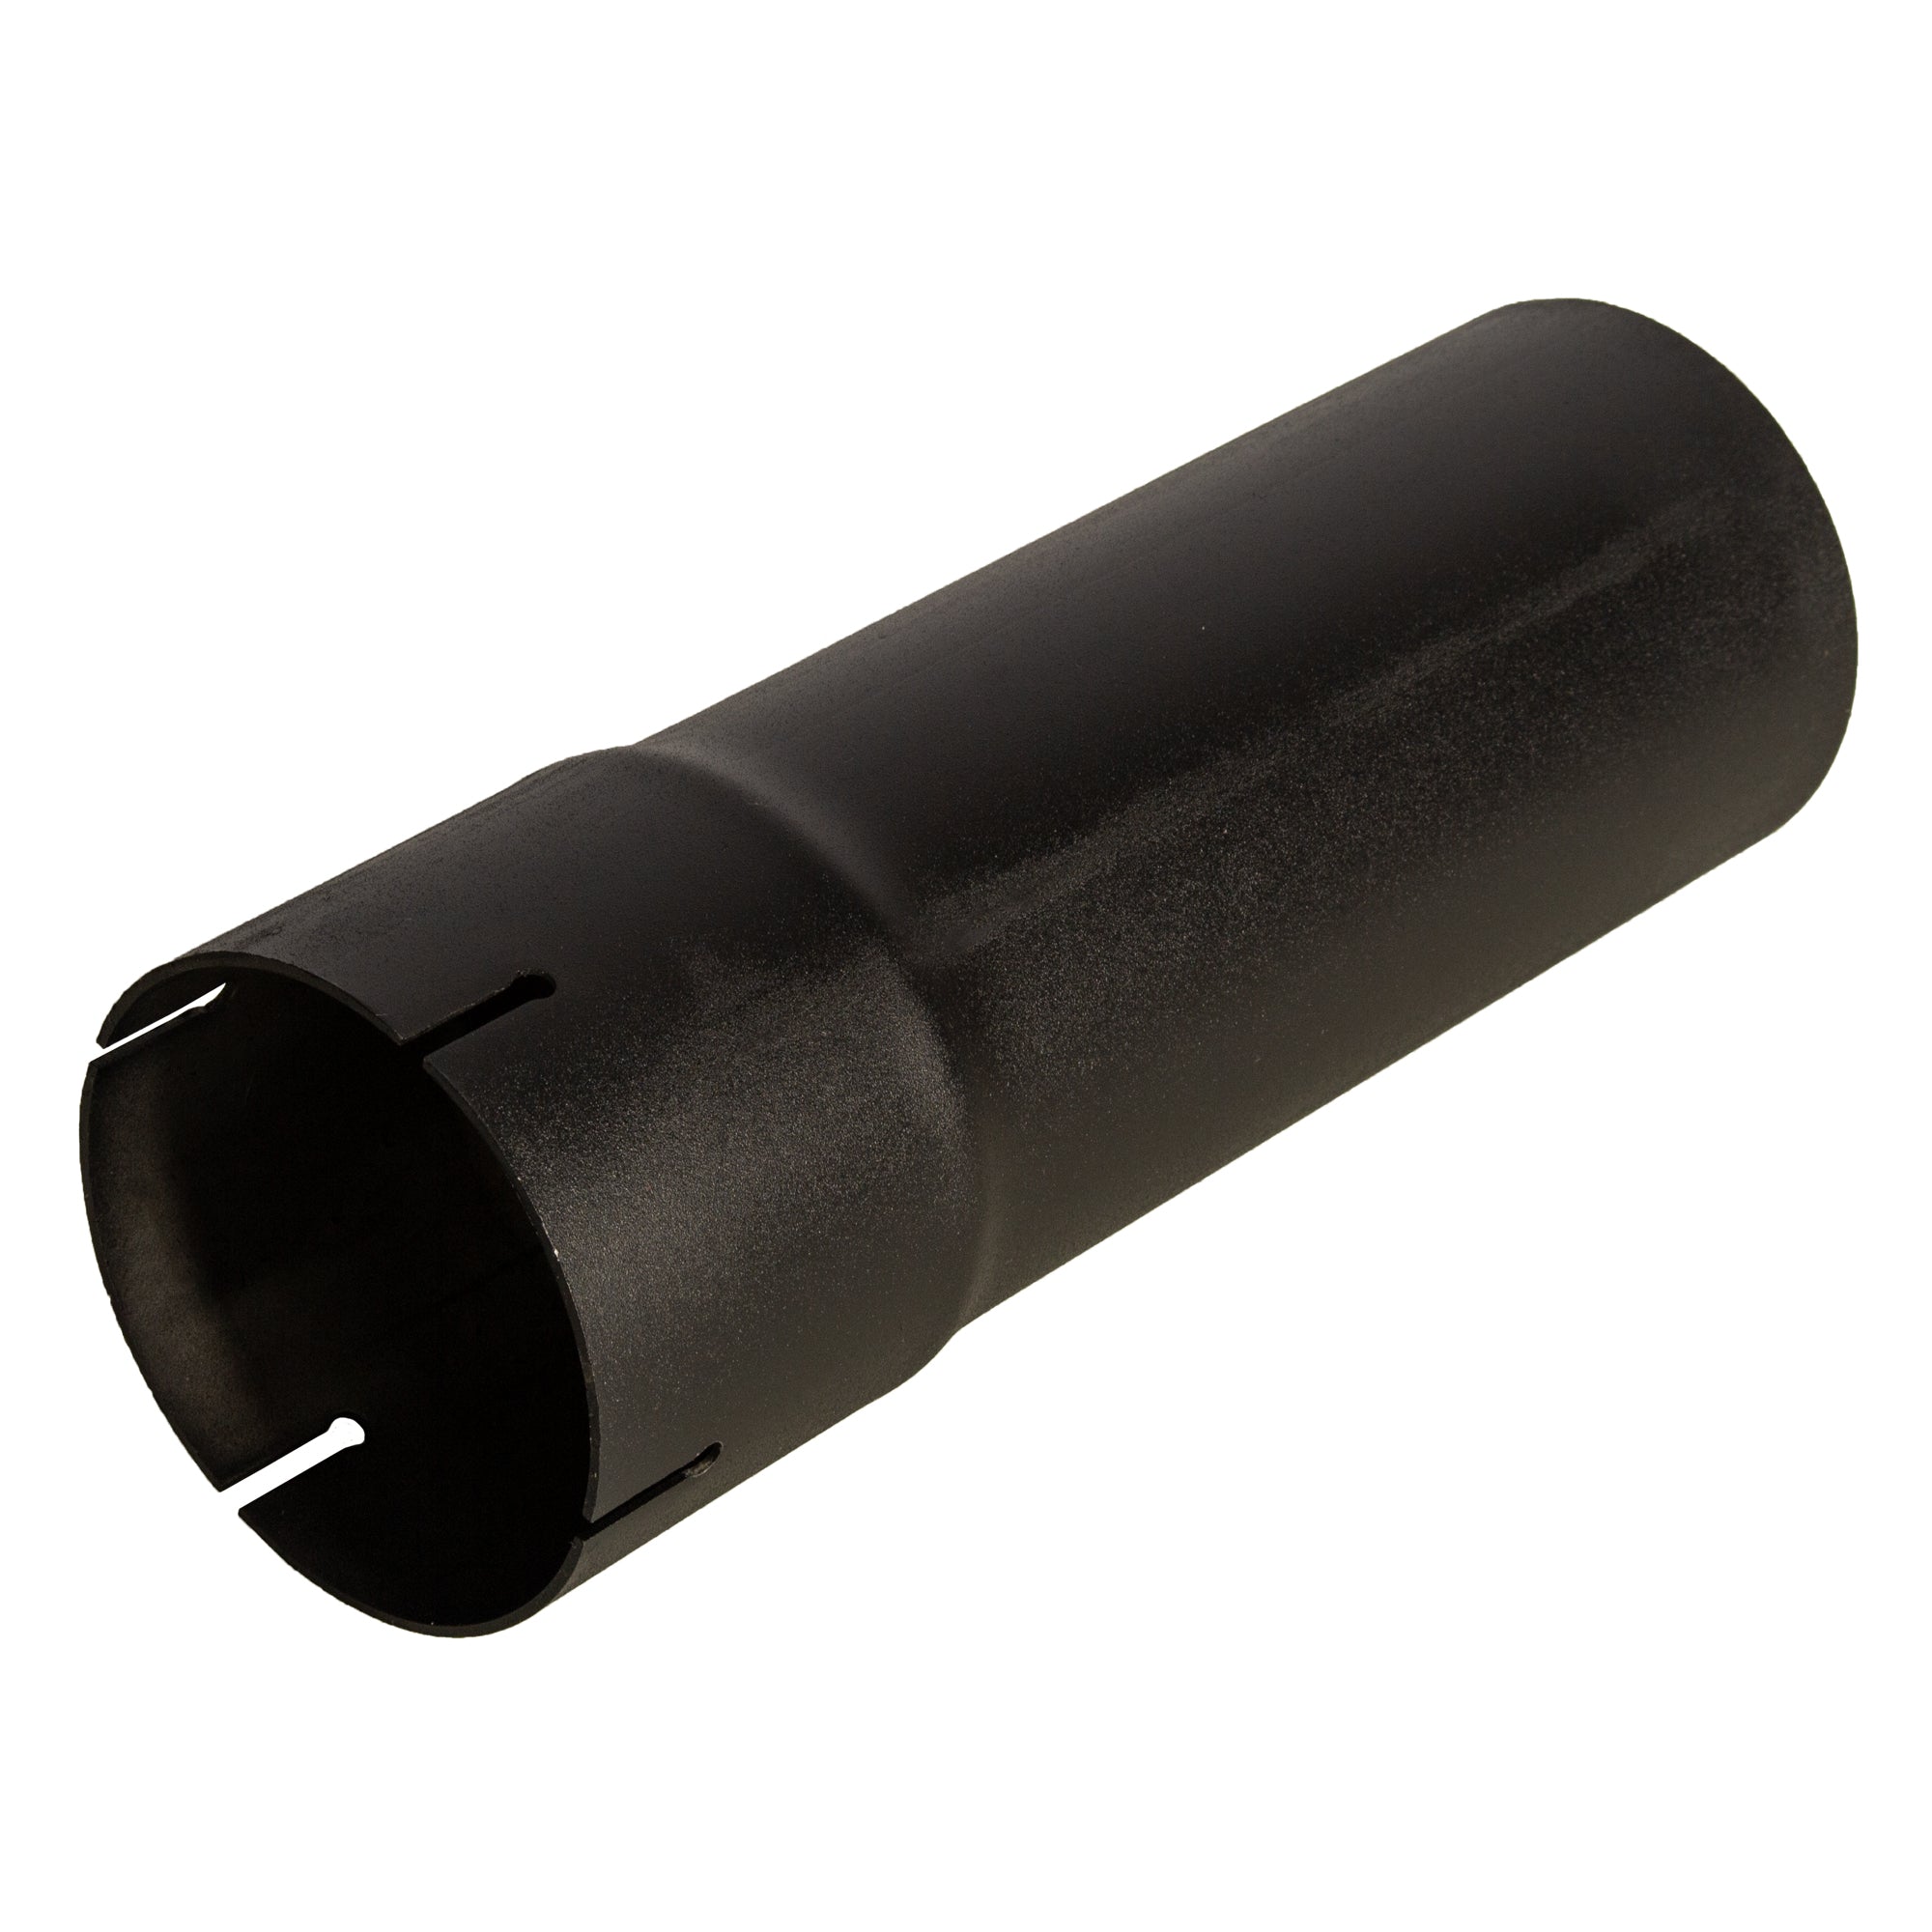 Exhaust Stack Pipe Replacement for UNIVERSAL - 4" x 12" Straight Black